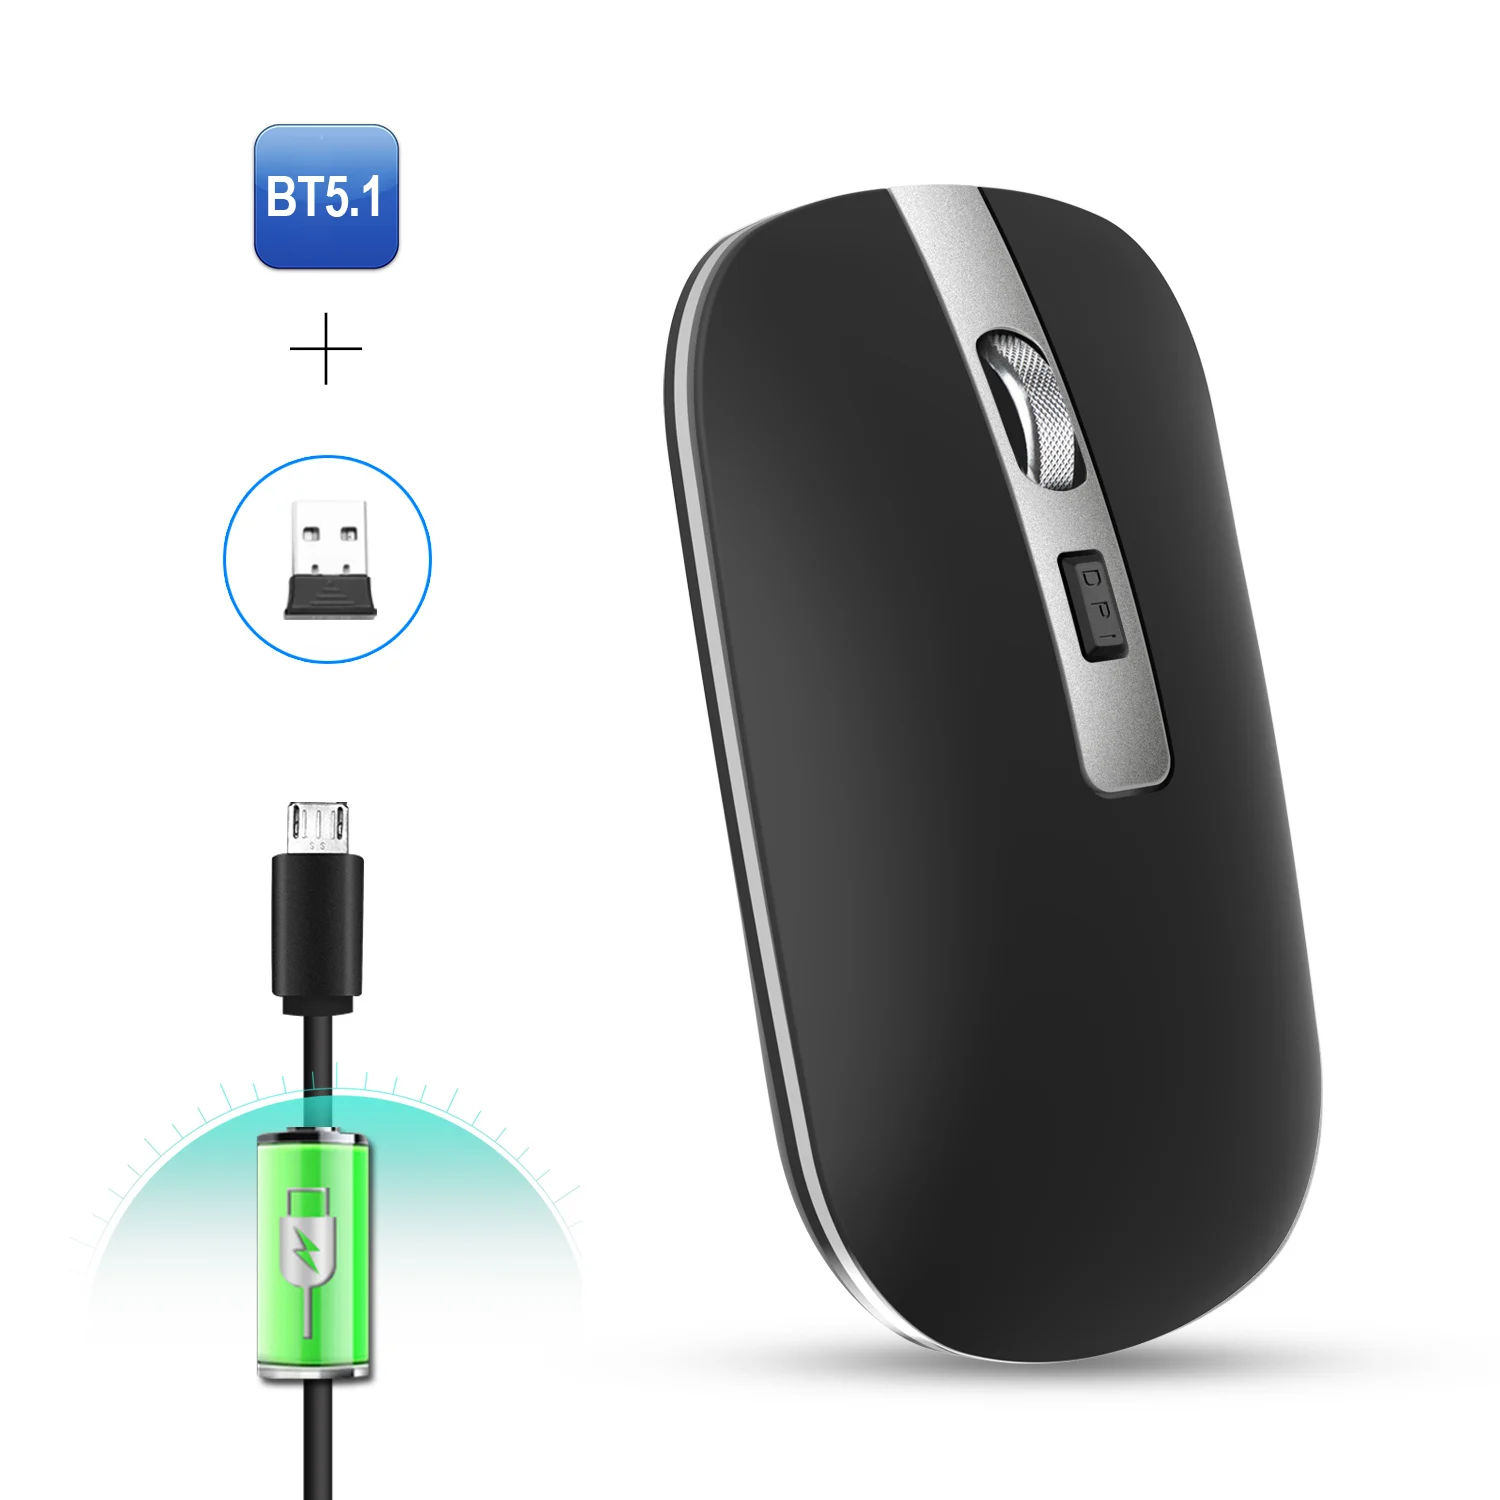 

New Rechargeable 2.4G Wireless Game Mouse Dual Mode Bluetooth 5.1 Optical Mute Mice 4 Button 1600DPI For Desktop Office PC Gamer